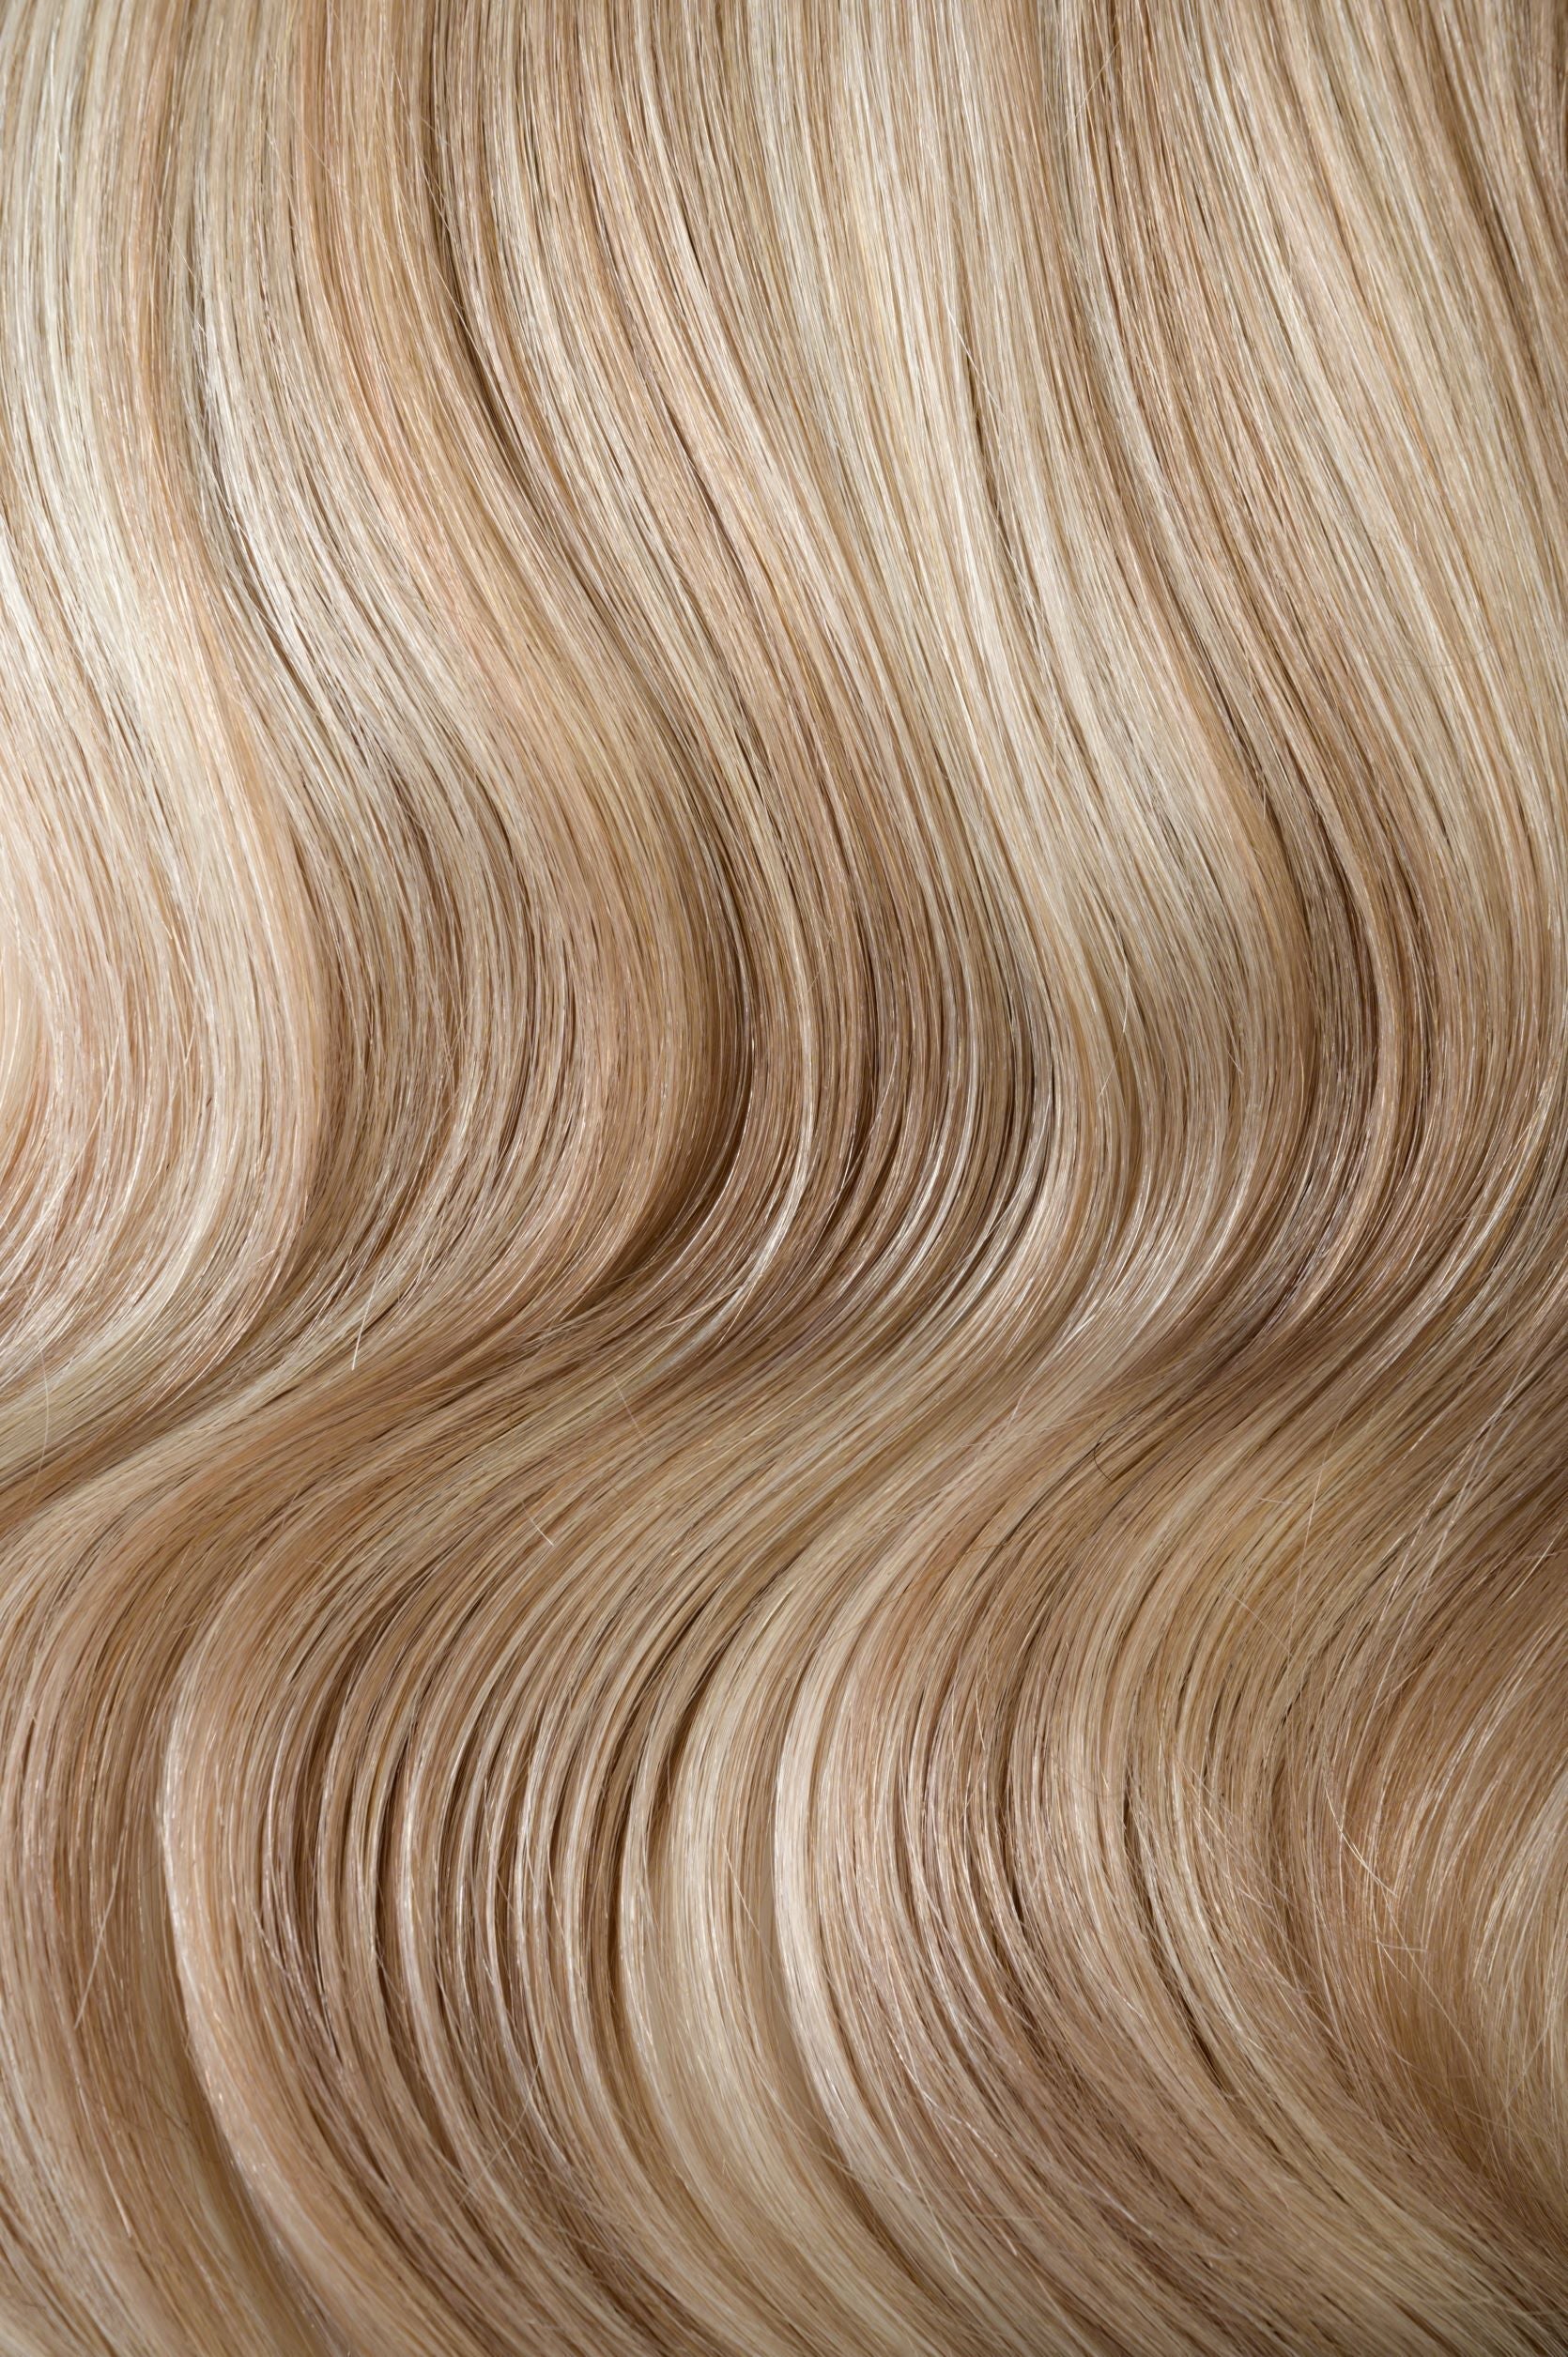 Pearl Ash Blonde Thumbnail. #18/60 Pearl Ash Blonde Highlights Seamless Clip In. Superior Hair Extensions.